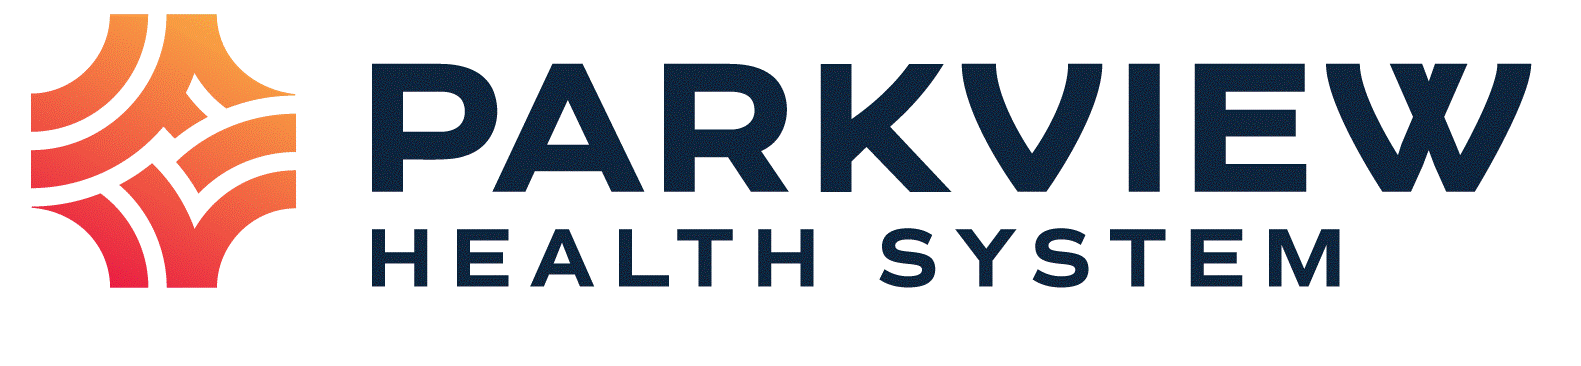 Parkview Health System